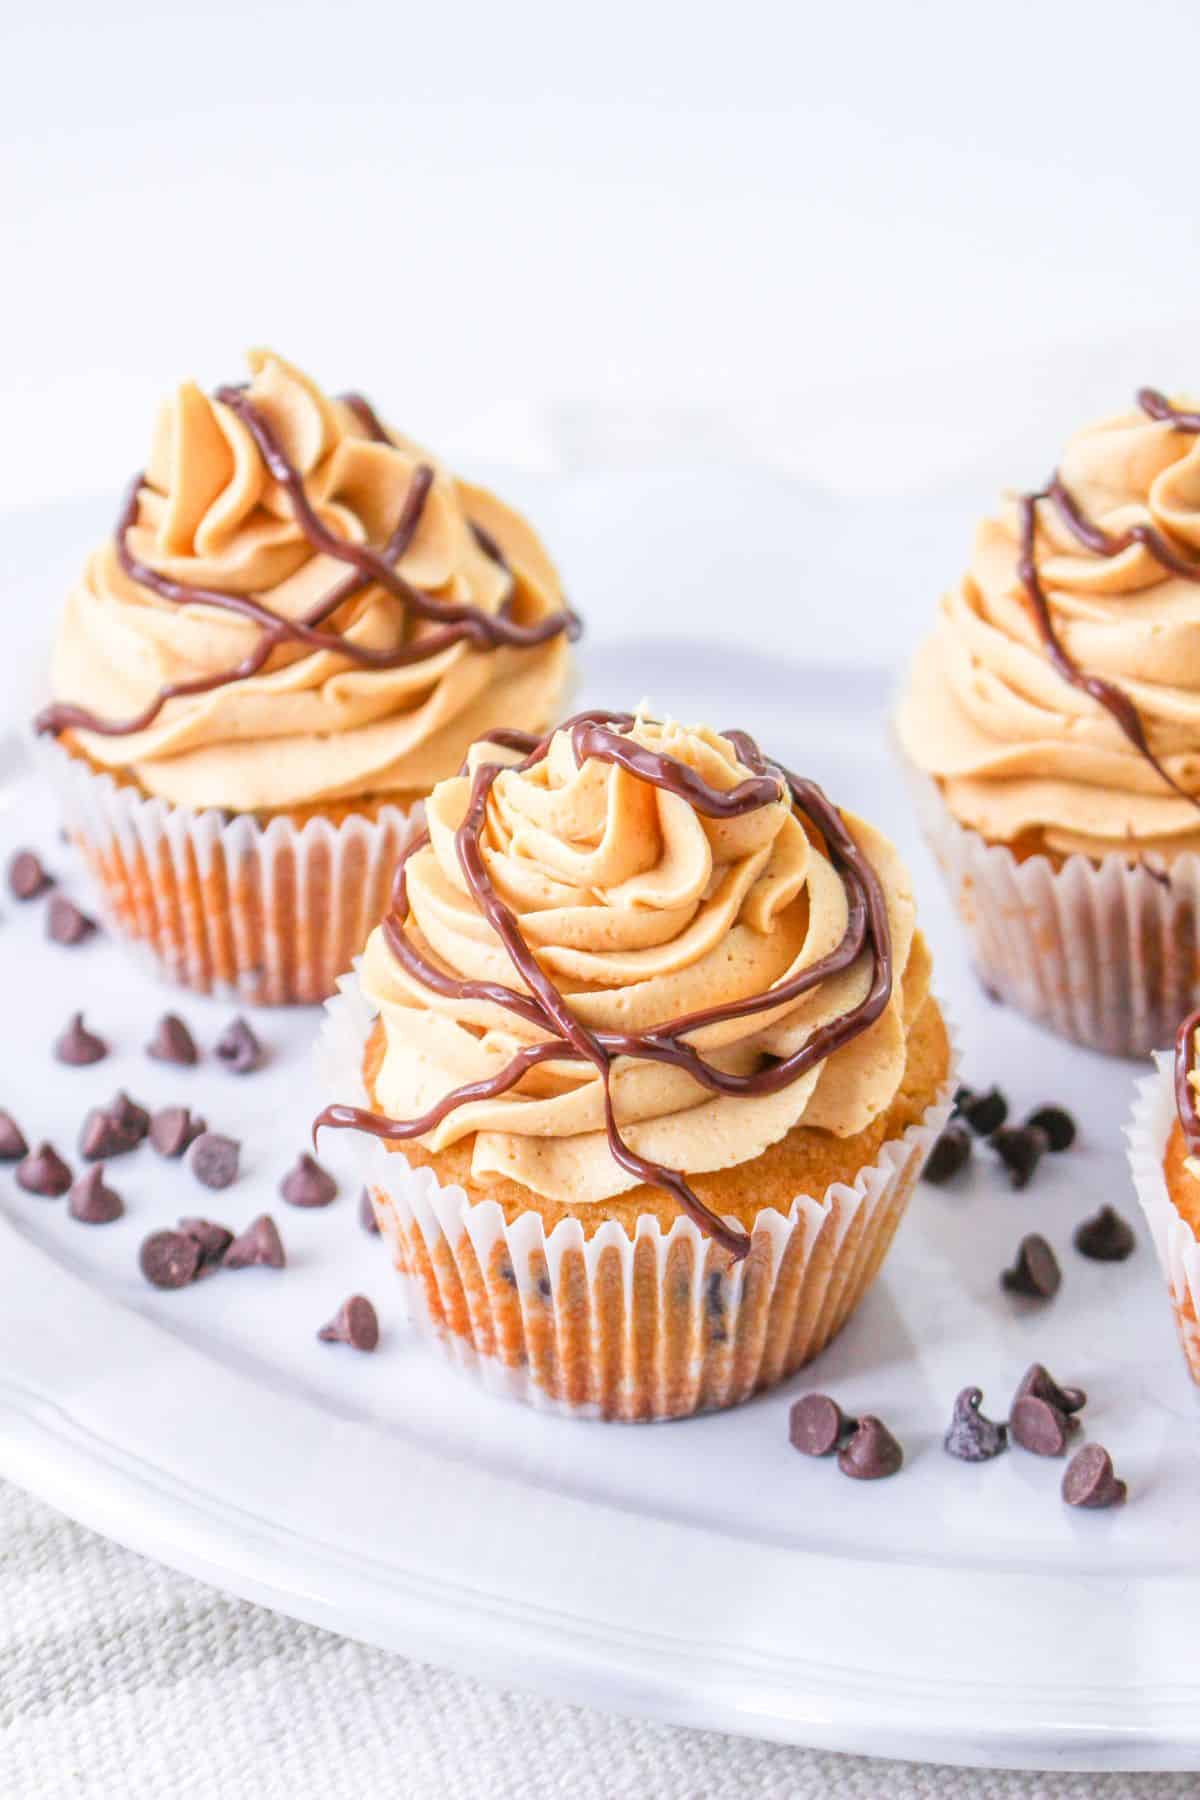 peanut butter chocolate chip cupcakes on a white plate with chocolate chips sprinkled on it.